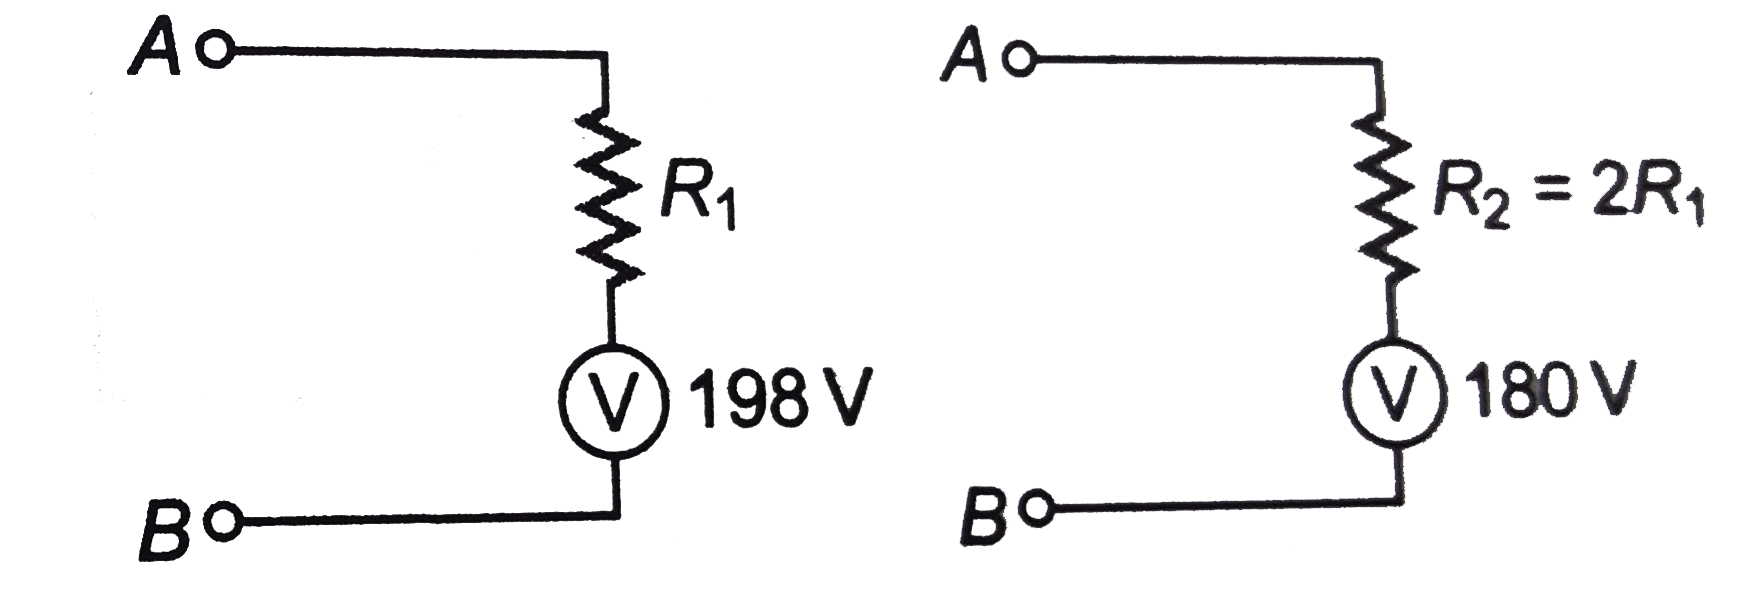 A voltmeter connected in series with a resistance R1 to a circuit indicates a voltage V1=198V. When a series resistor R2=2R1 is used, the voltmeter indicates as voltage V2=180V. If the resistance of the voltmeter is RV=900Omega, then the applied voltage across A and B is